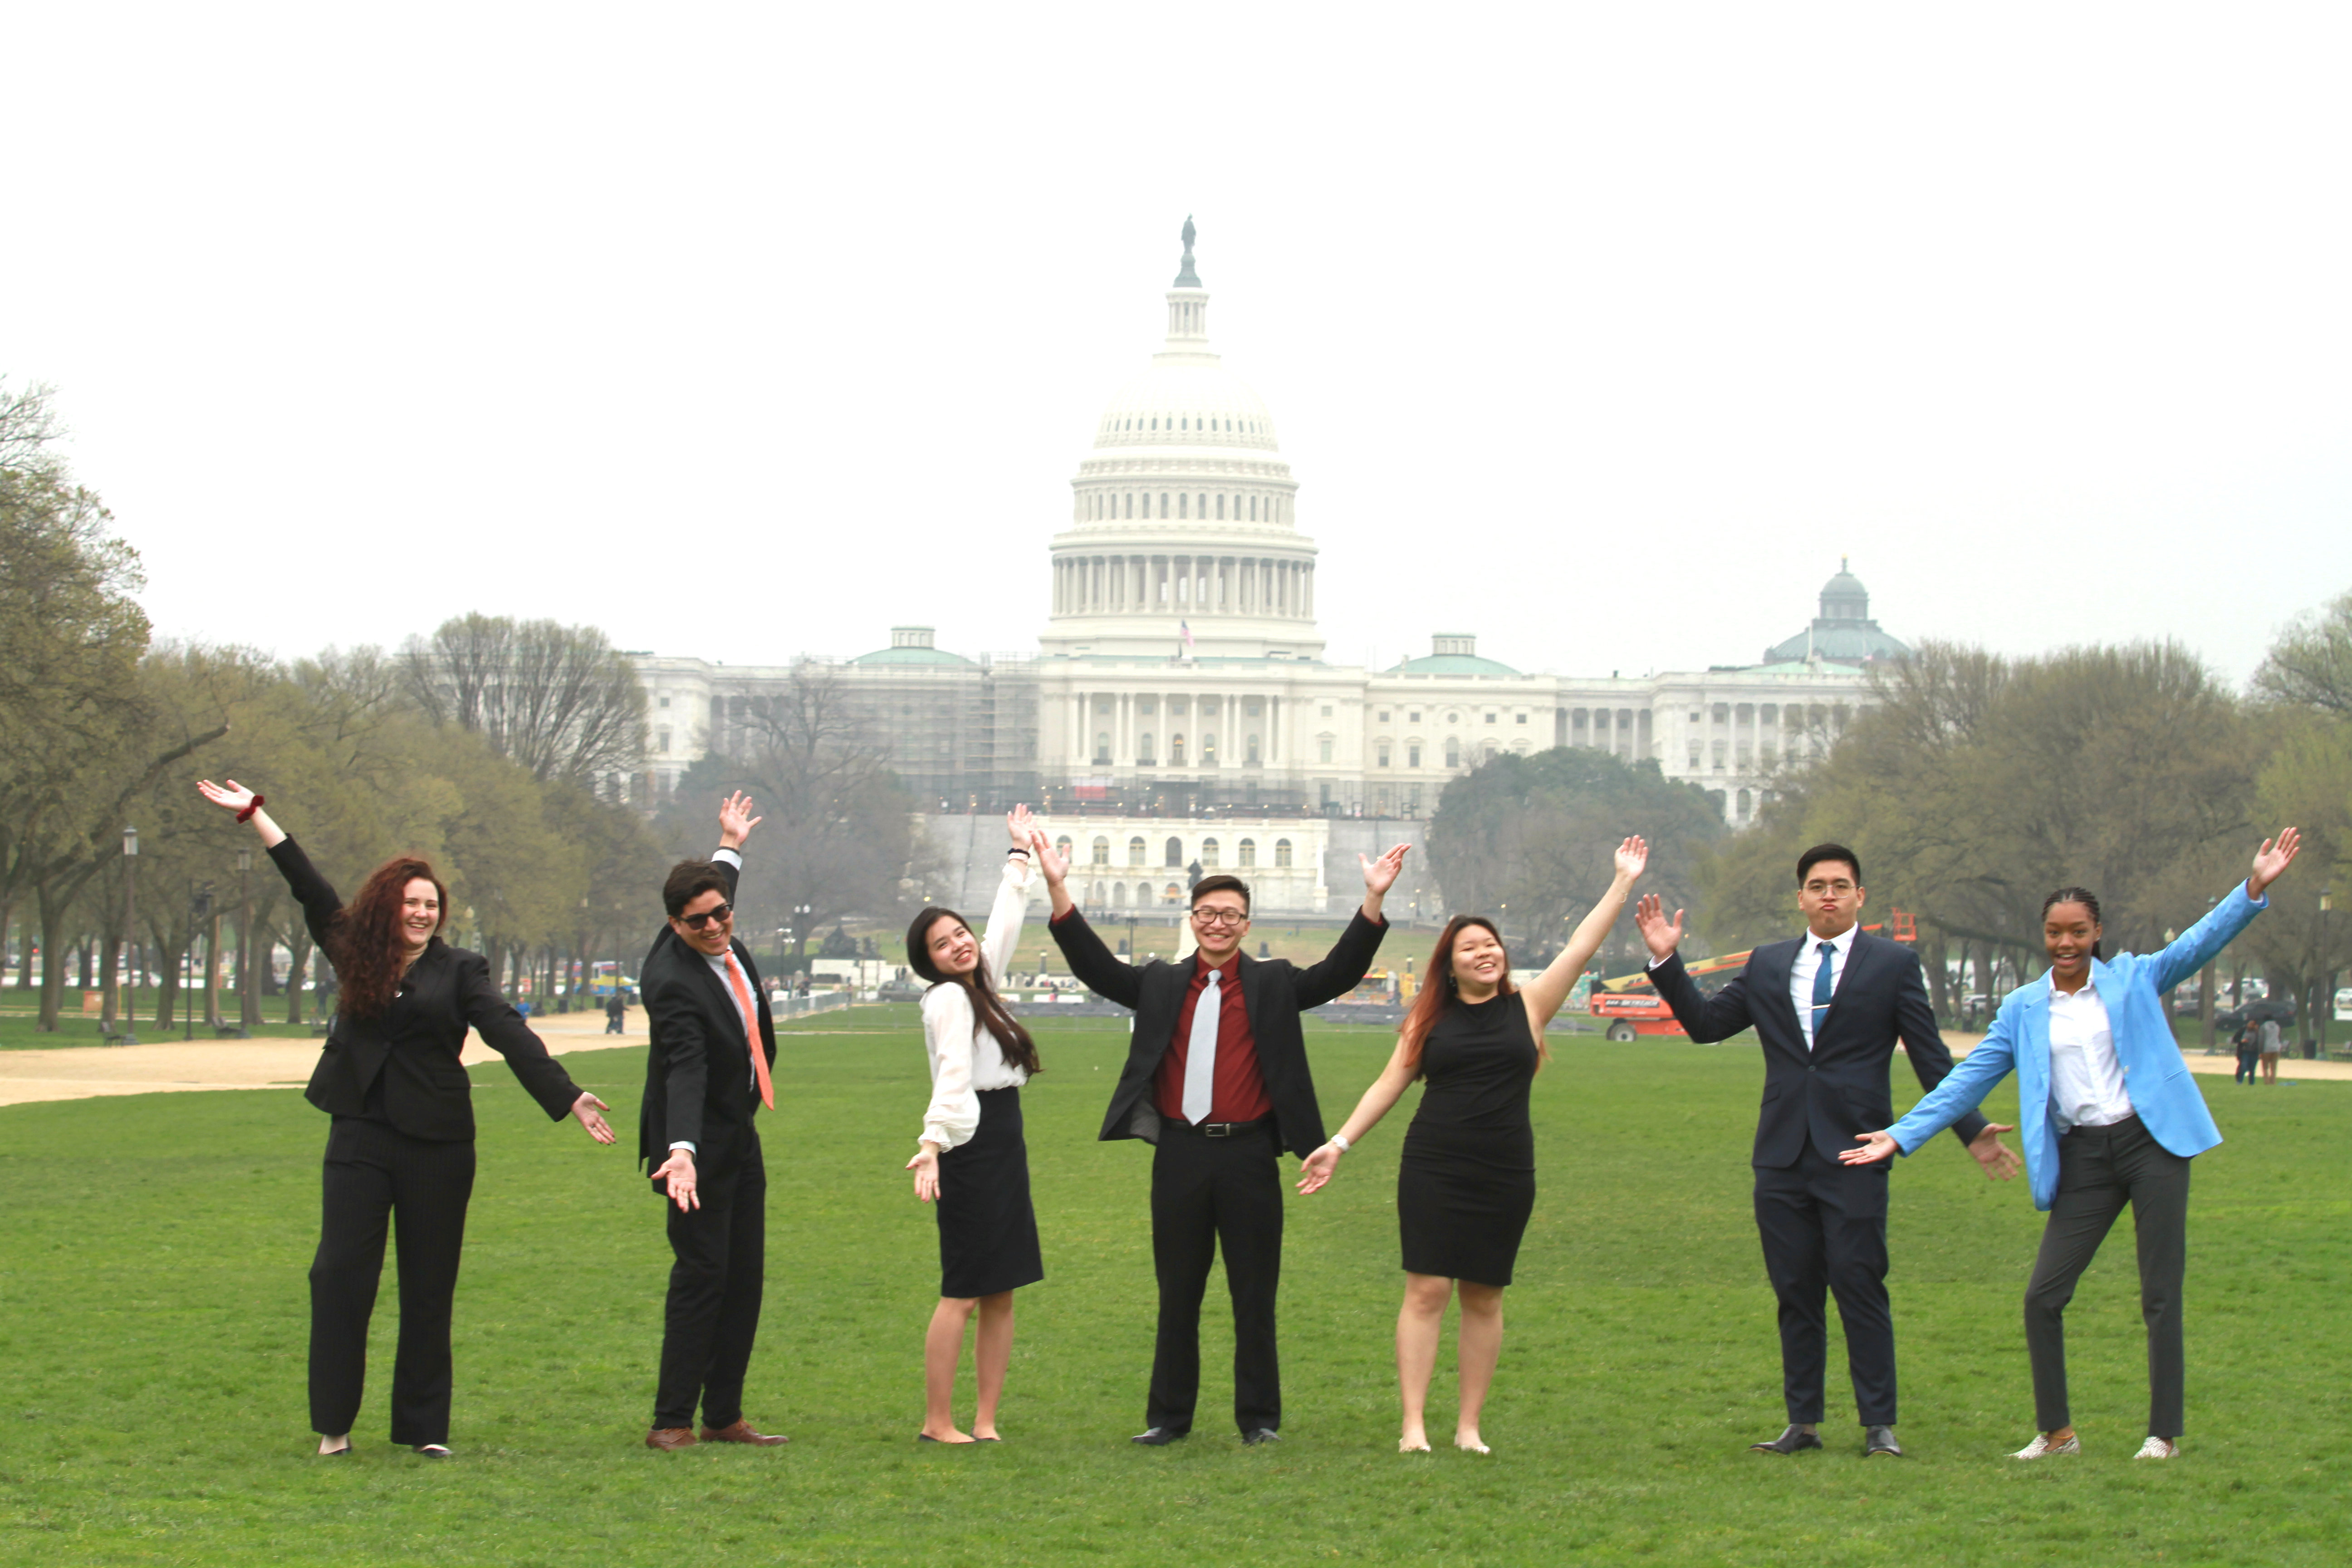 Messiah students posing with their hands up infront of the capital building in Washington DC